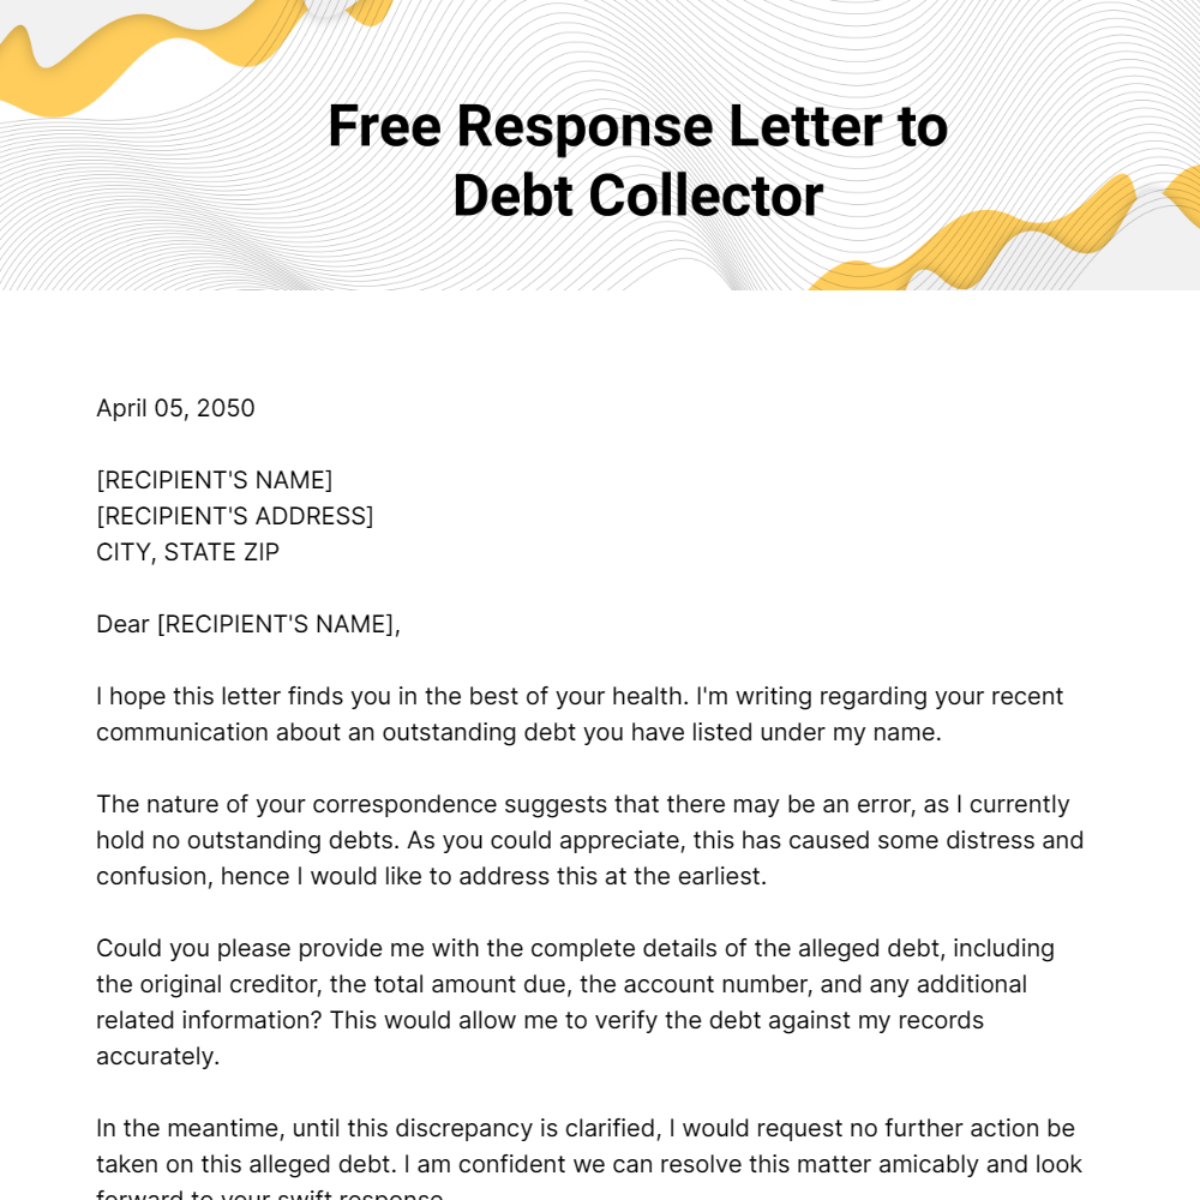 Free Response Letter to Debt Collector